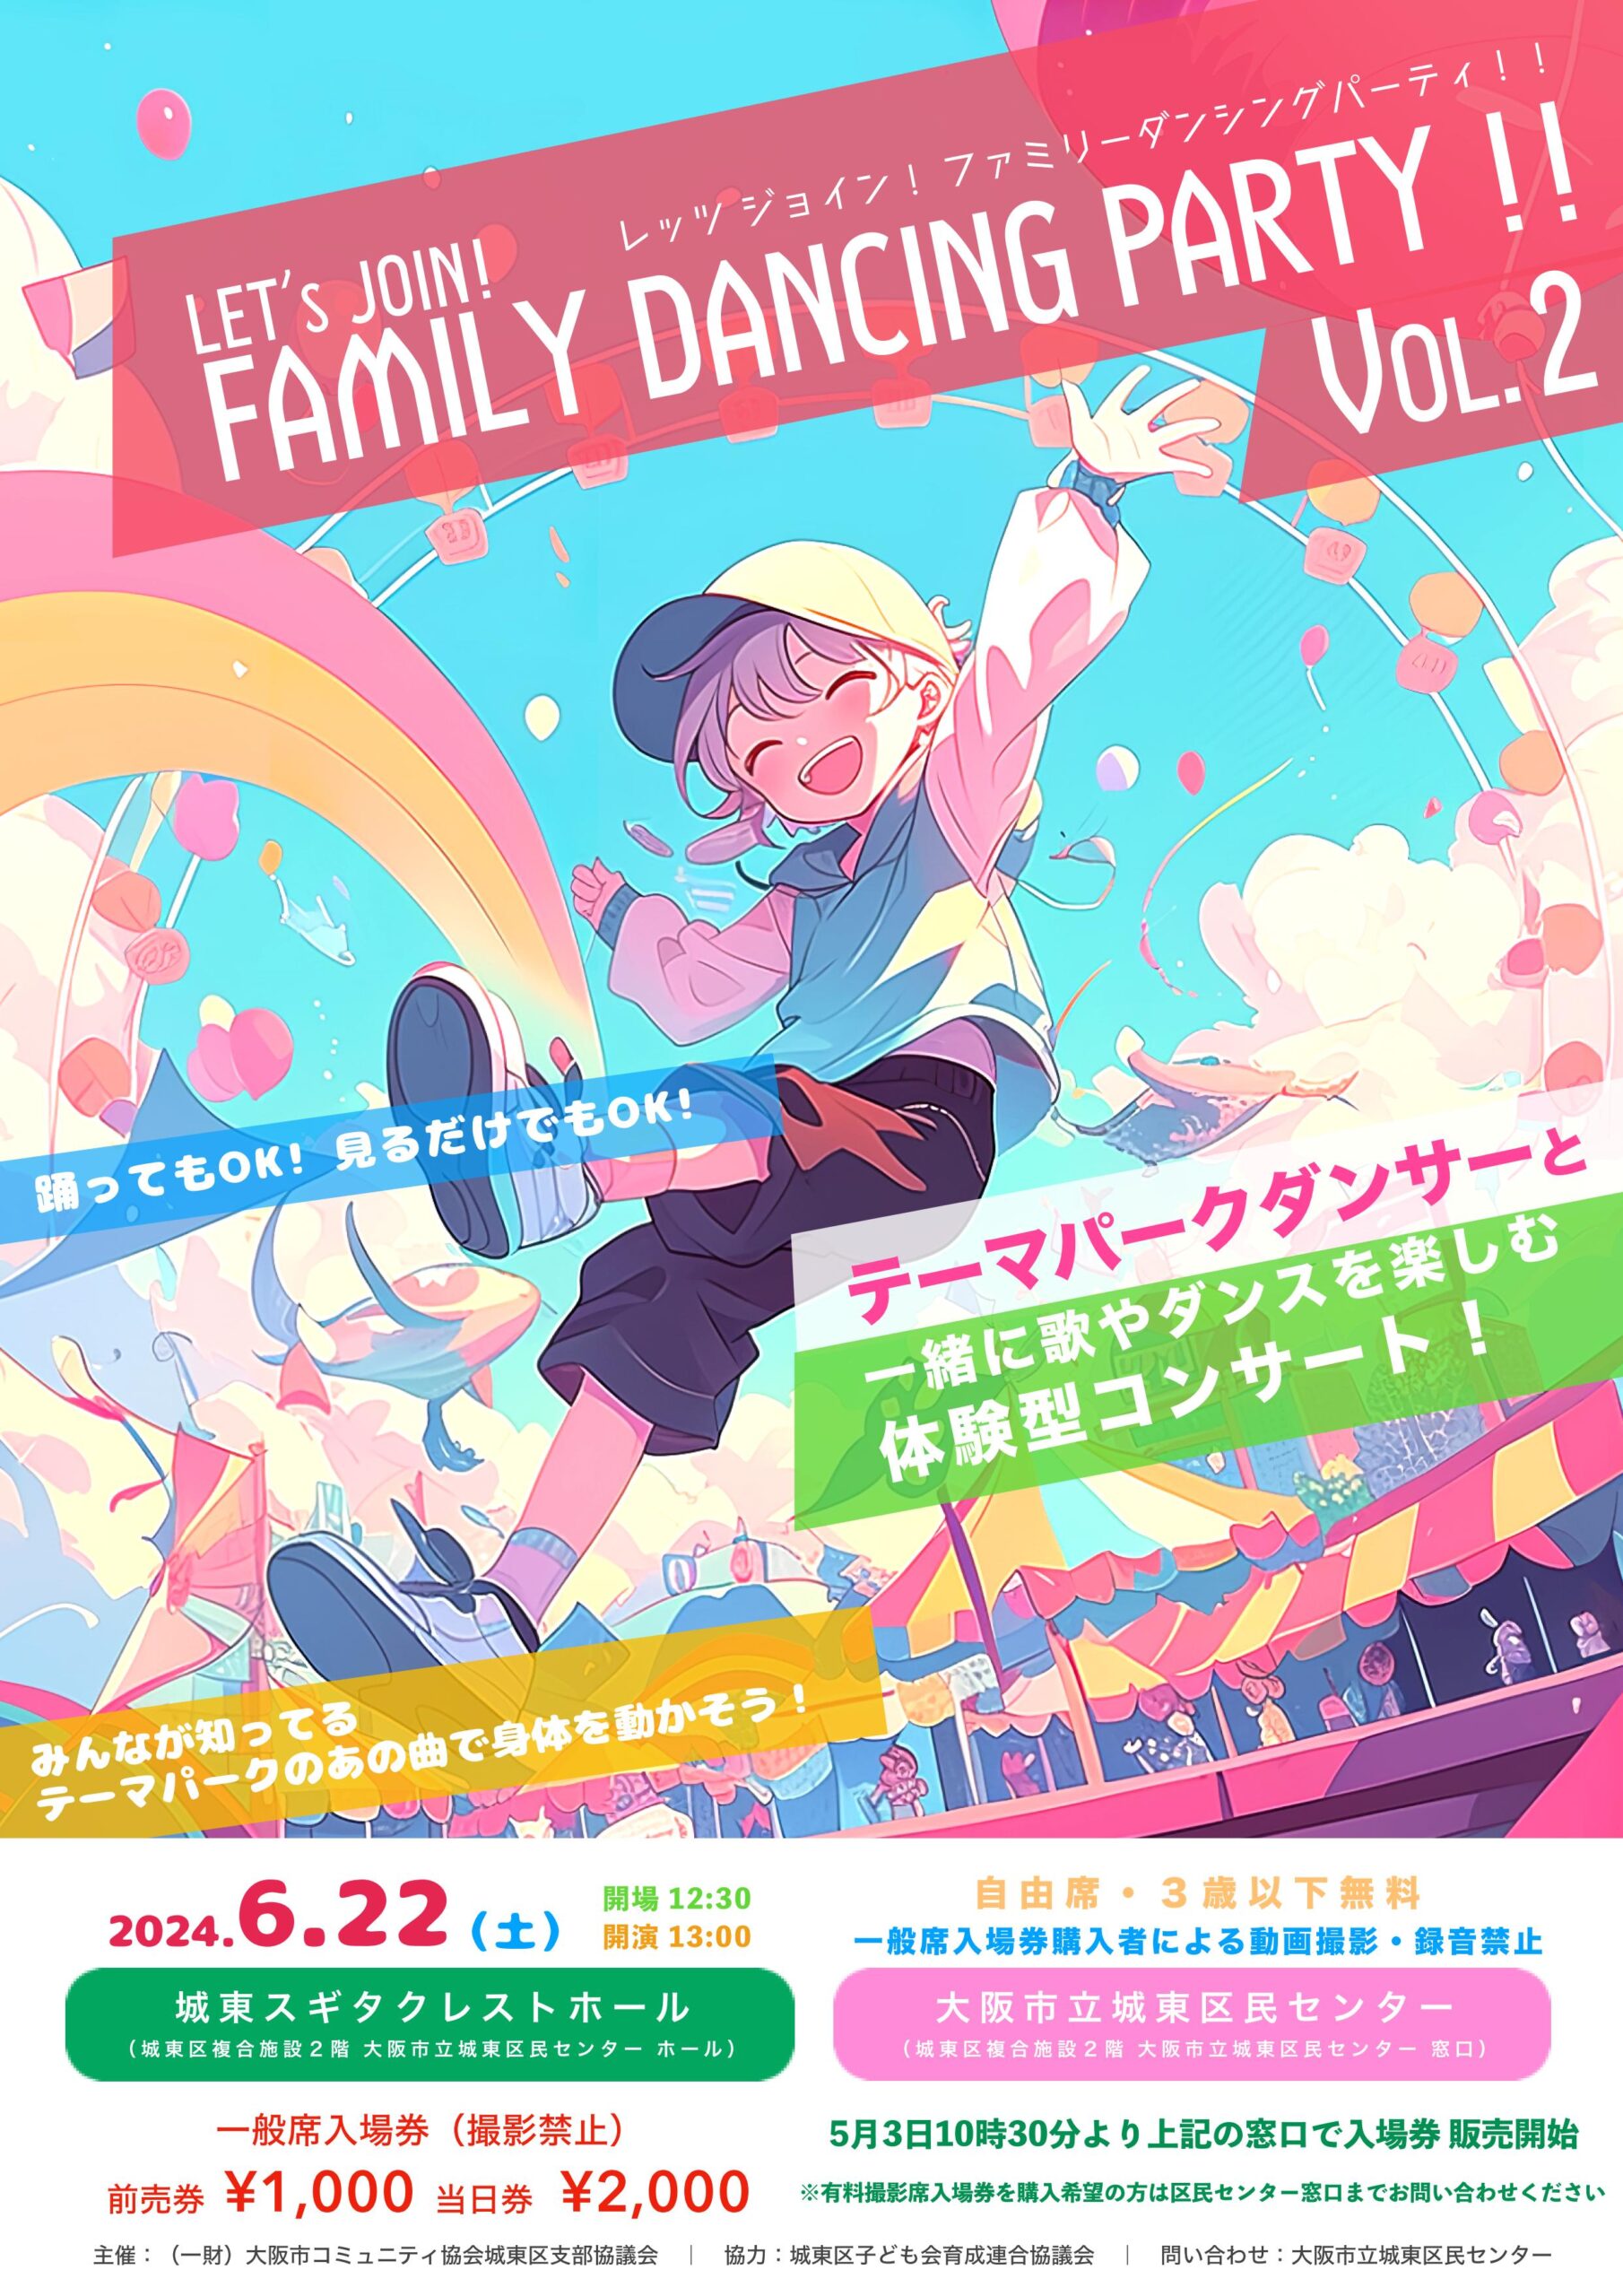 Let’s Join ! Family Dancing party !! Vol.2